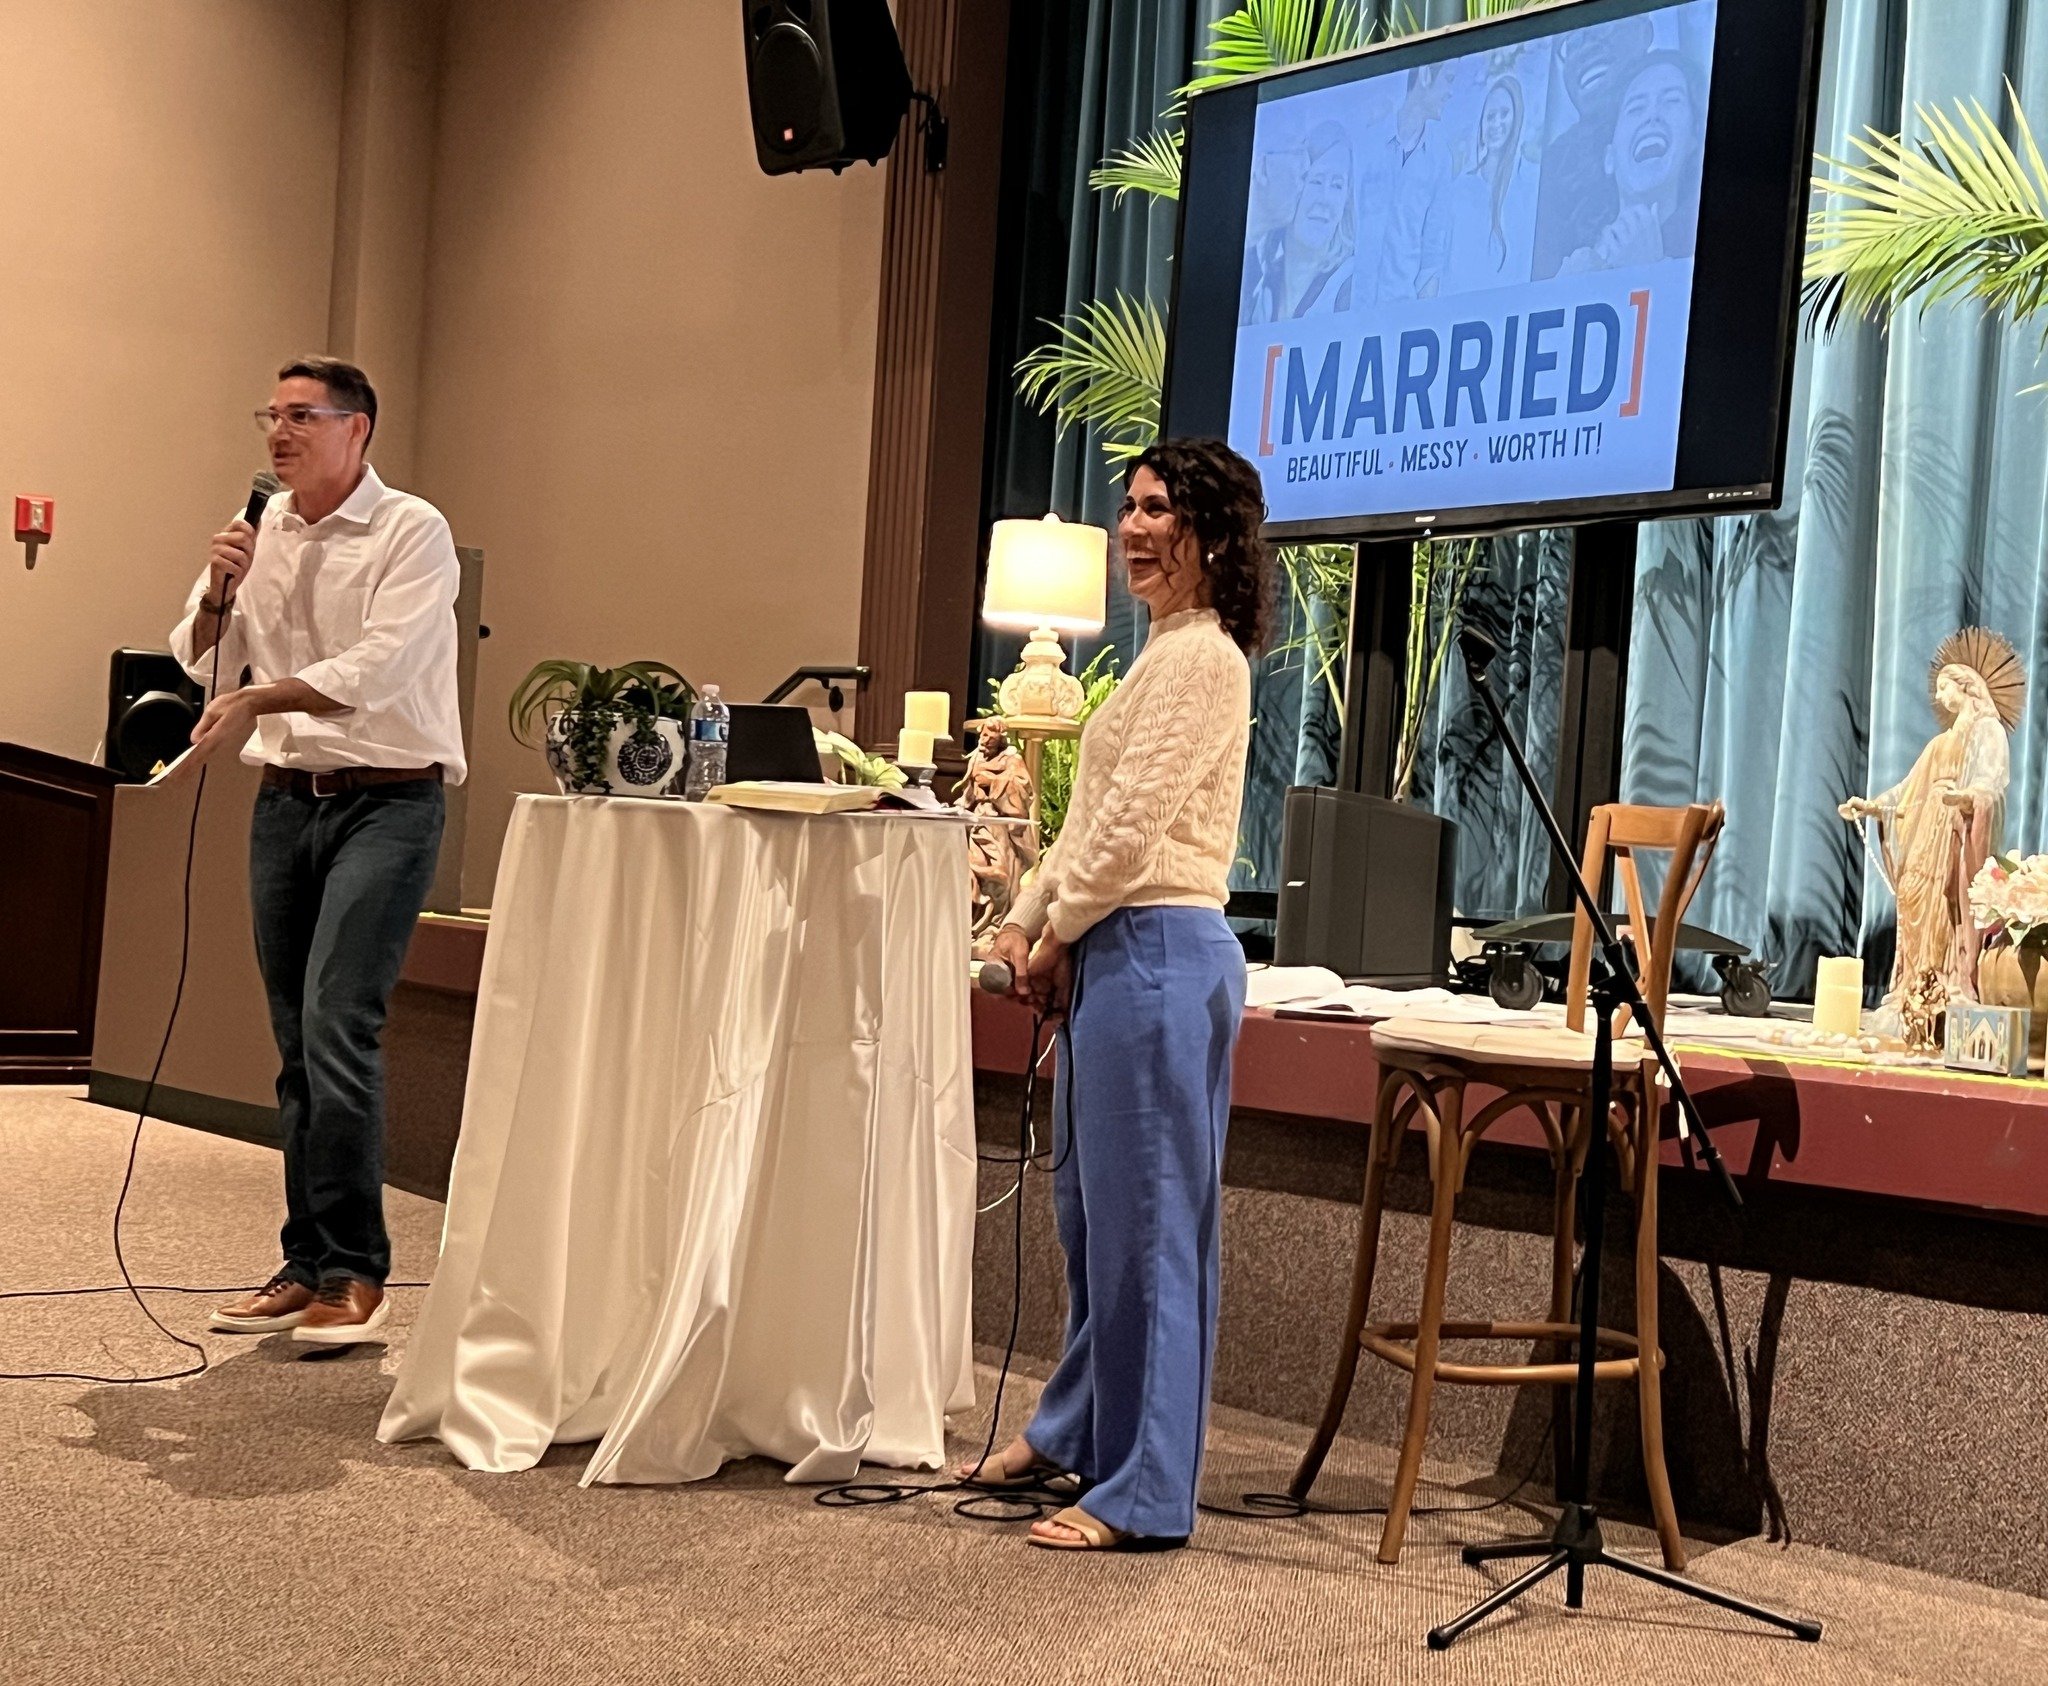 Gretchen and I had a wonderful time at the one day [Married] conference! It was sold out with so many amazing couples. Huge thanks to Renew and St. Pius!